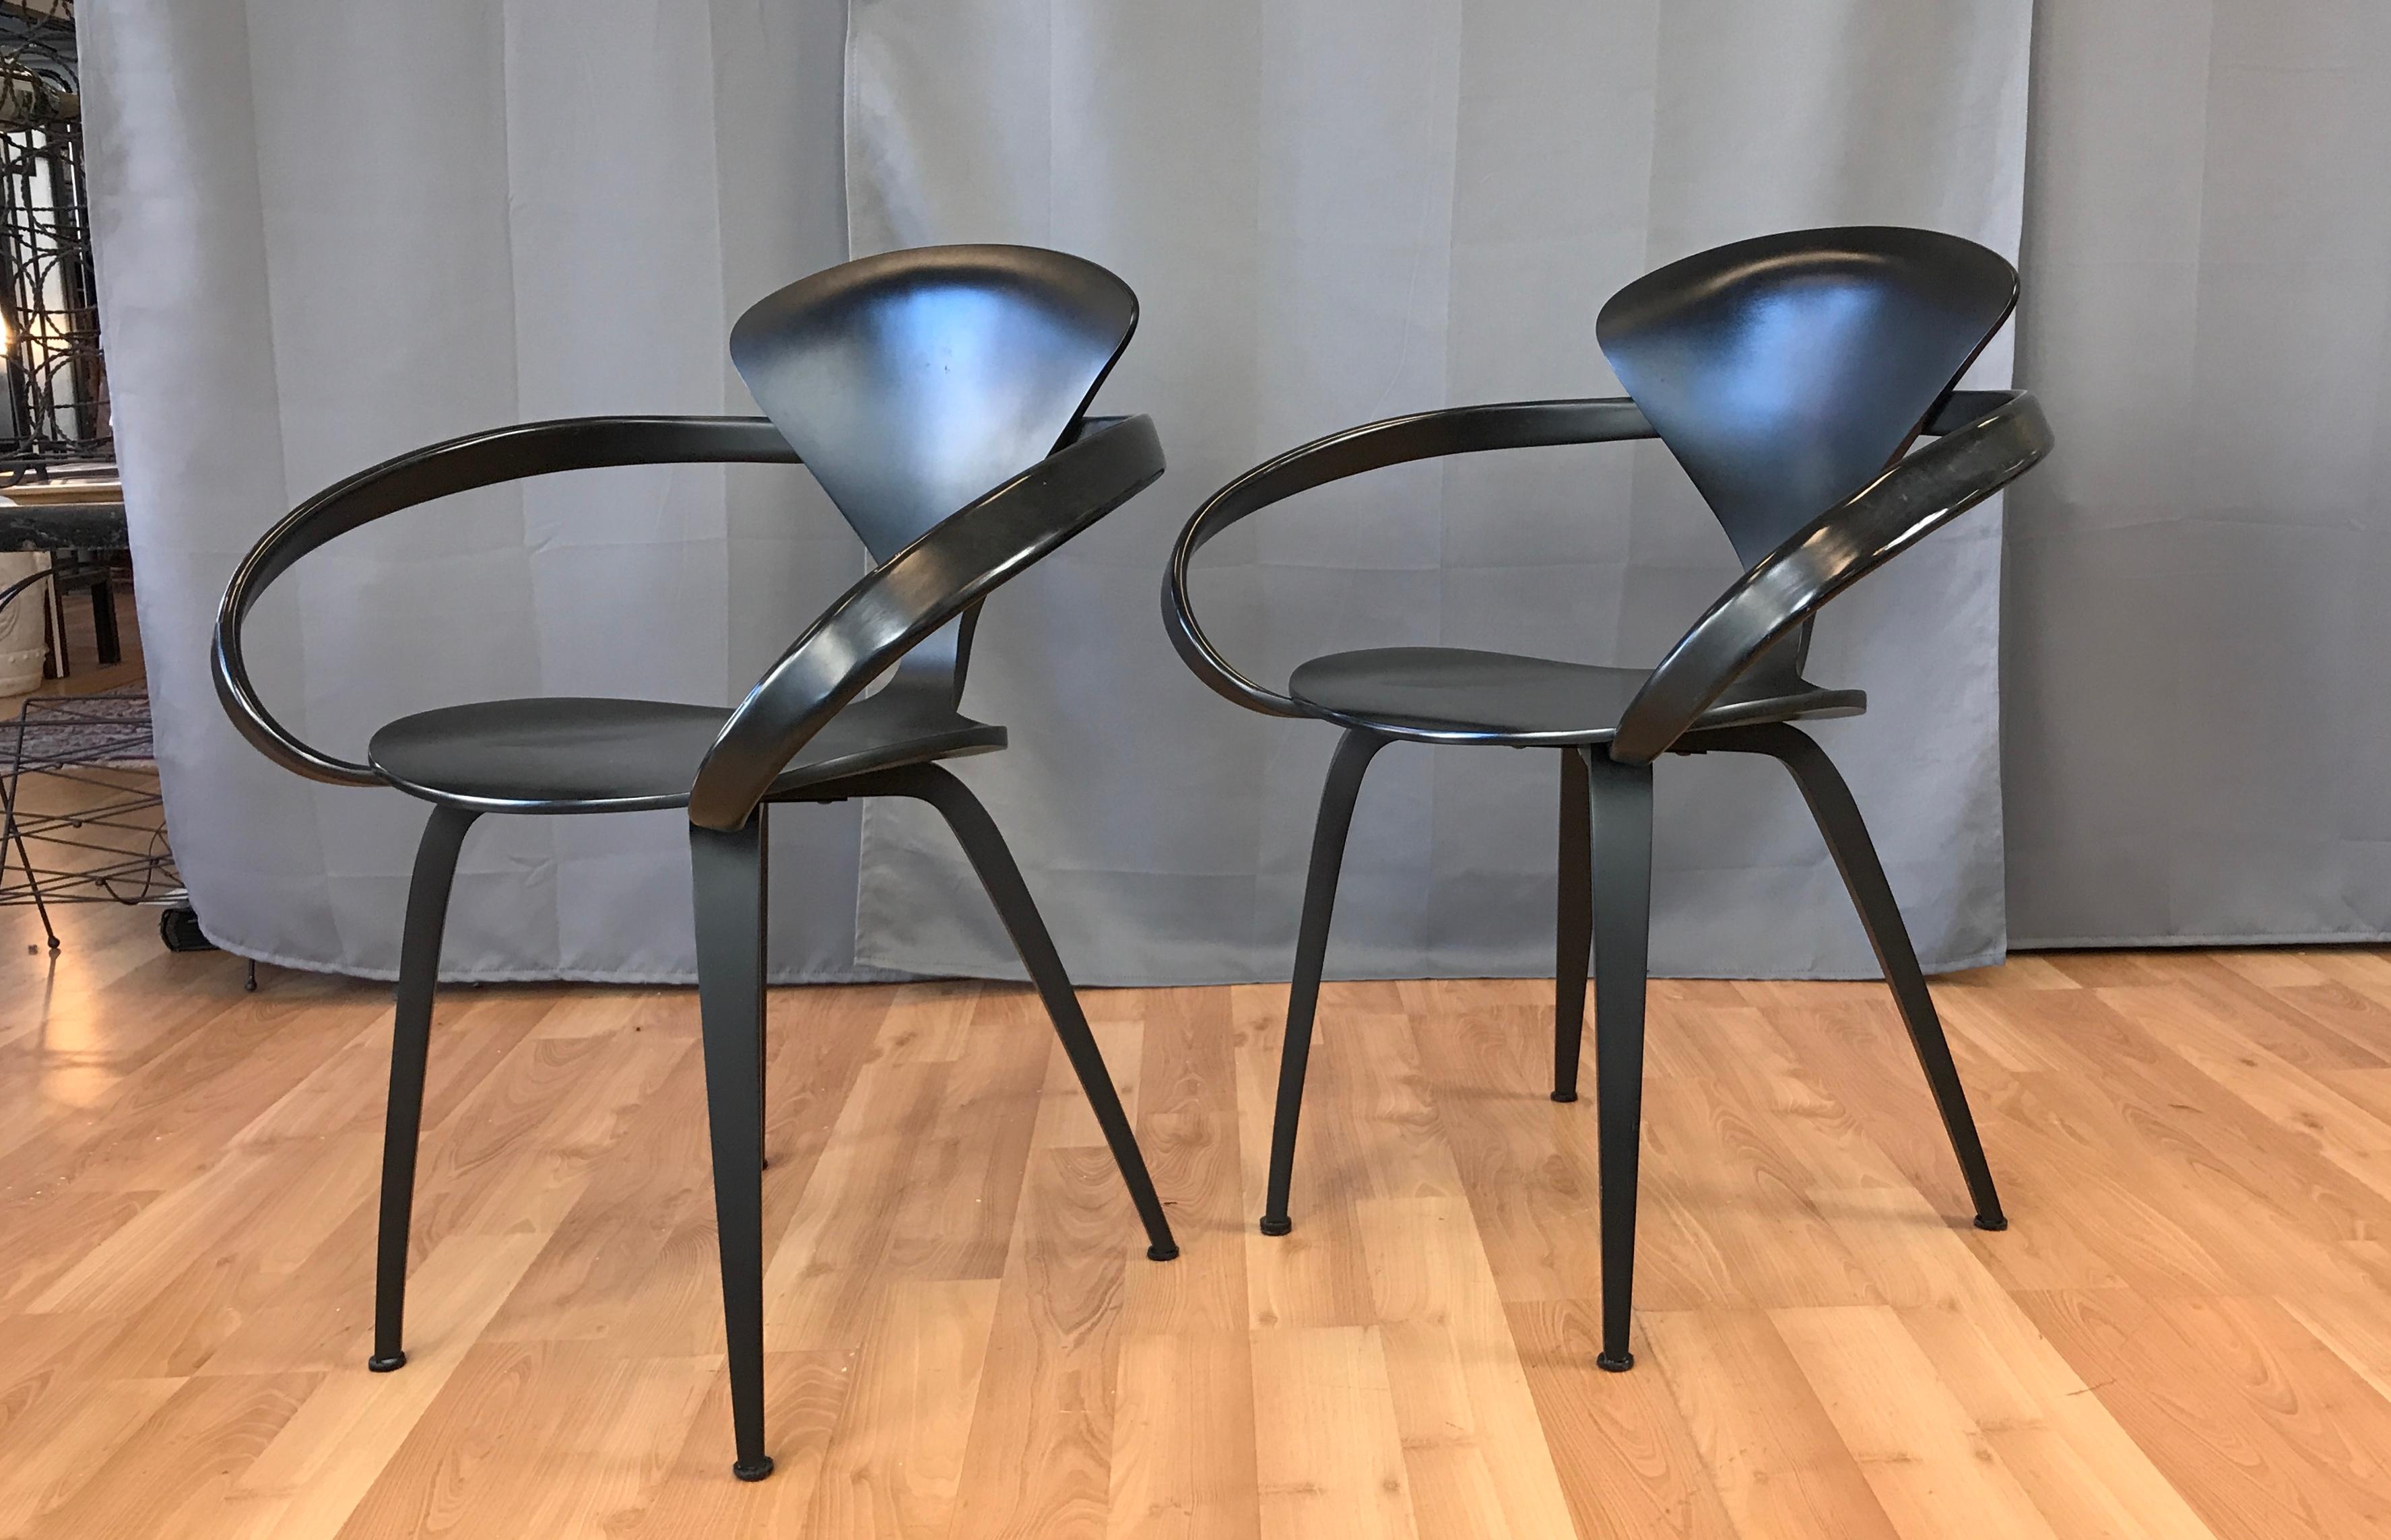 Two black Cherner armchairs designed by Norman Cherner, they were first created for Plycraft. They are now produced by his son's Cherner Chair Company. Constructed of laminated plywood of graduating thicknesses, from 5 ply at the perimeter edge of